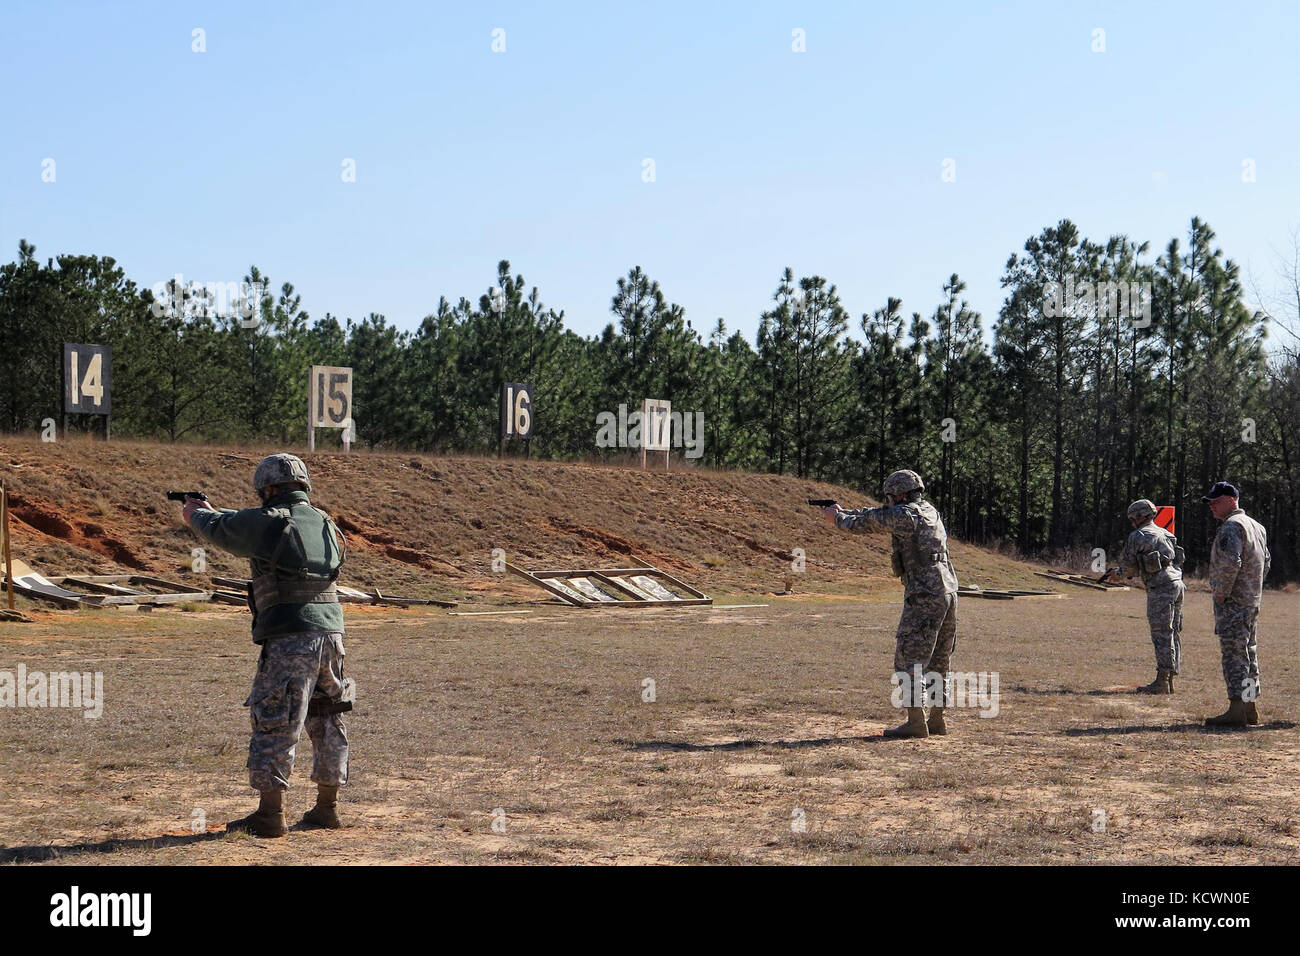 Military members participate in the annual South Carolina National Guard TAG match during the M9 pistol marksmanship portion at a firing range near the McCrady Training Center, Eastover, South Carolina, March 6, 2016.  More than 50 participants joined the TAG match competition held March 5-6, hosted by the South Carolina Army National Guard's Marksmanship Training Unit and included teams from the S.C. Air National Guard, Fort Jackson, and a team from Germany. (U.S. Army National Guard photo by Lt. Col. Cindi King/ released) Stock Photo